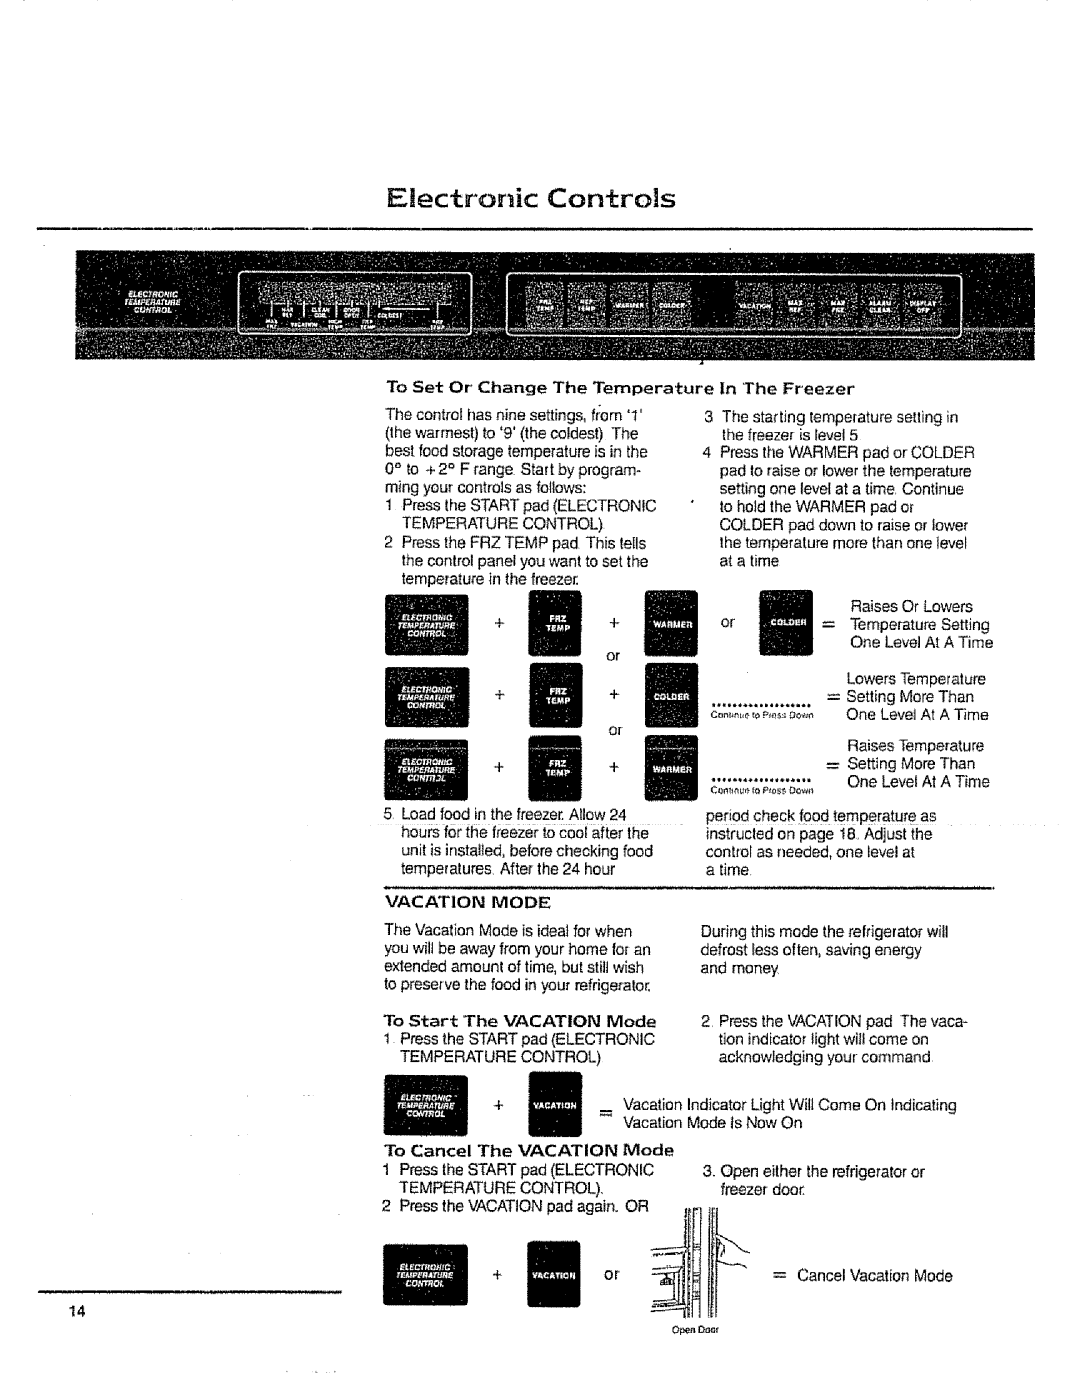 Sears 10062603 manual Electronic Controls, a time, 3, Open either the refrigeratoror freezer door, = Cancel Vacation Mode 